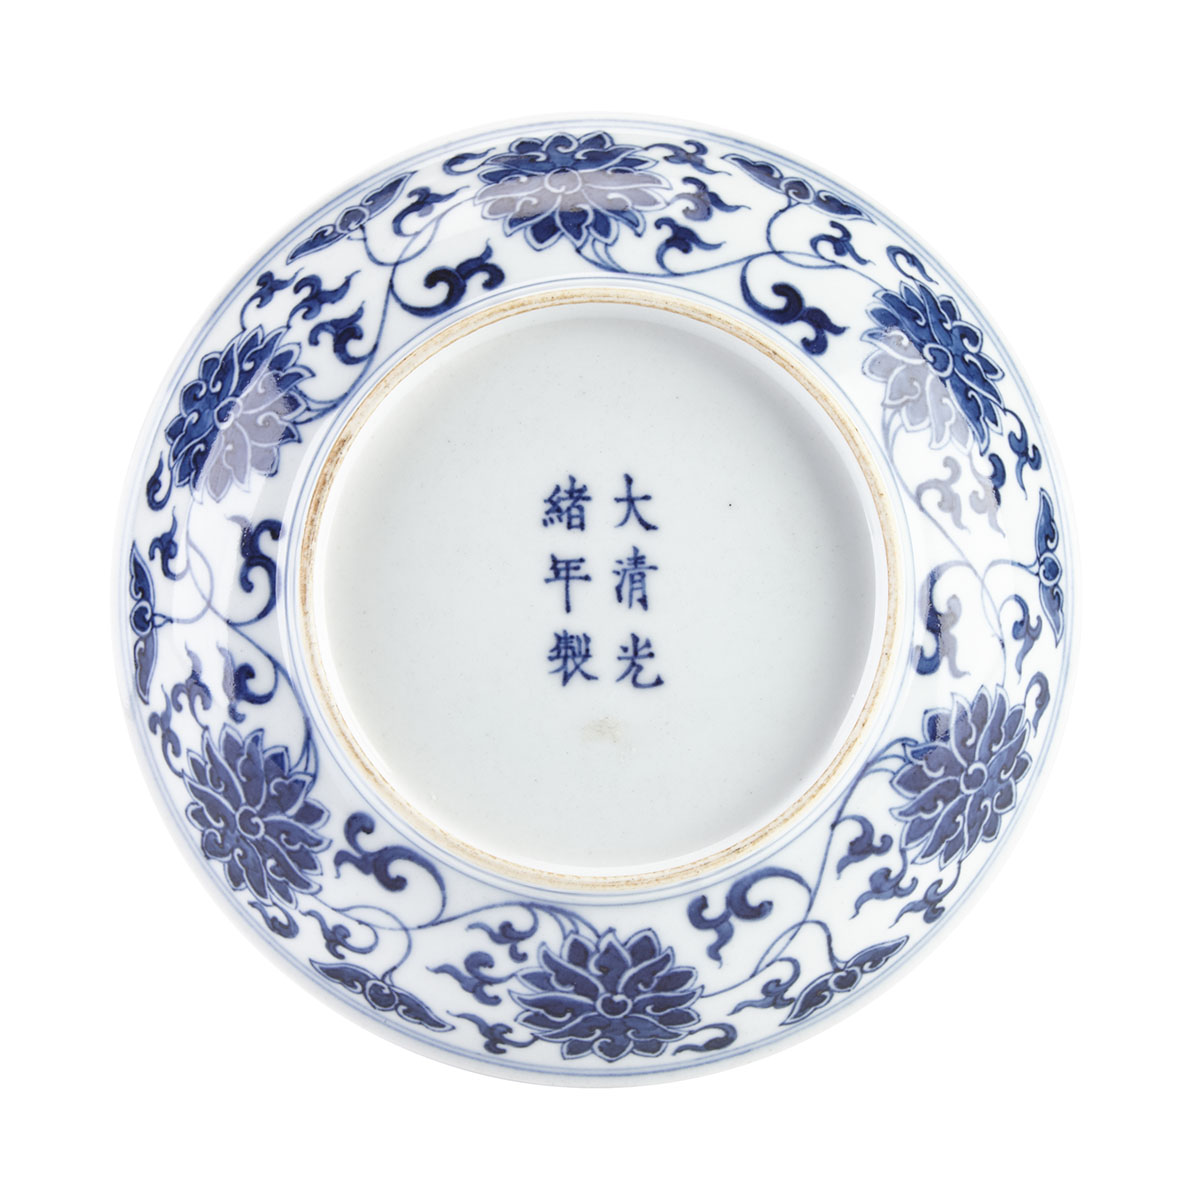 A Blue and White Lotus Dish, Guangxu Mark and Period (1875-1908)